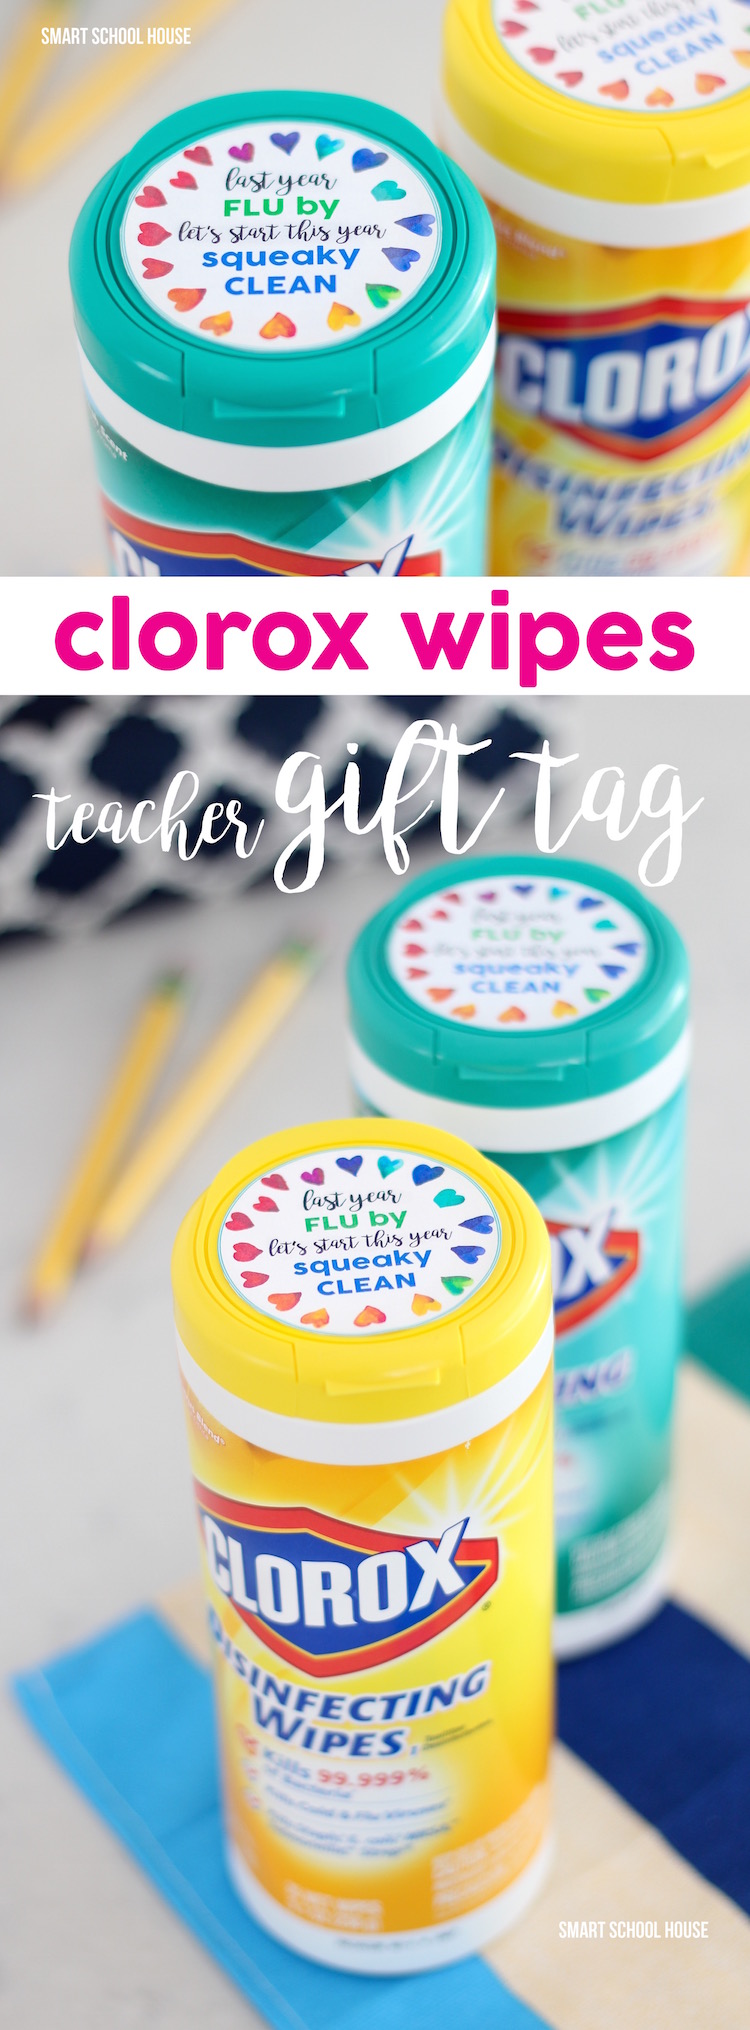 Colorox Wipes Teacher Gift Tag for Back to School or the New Year